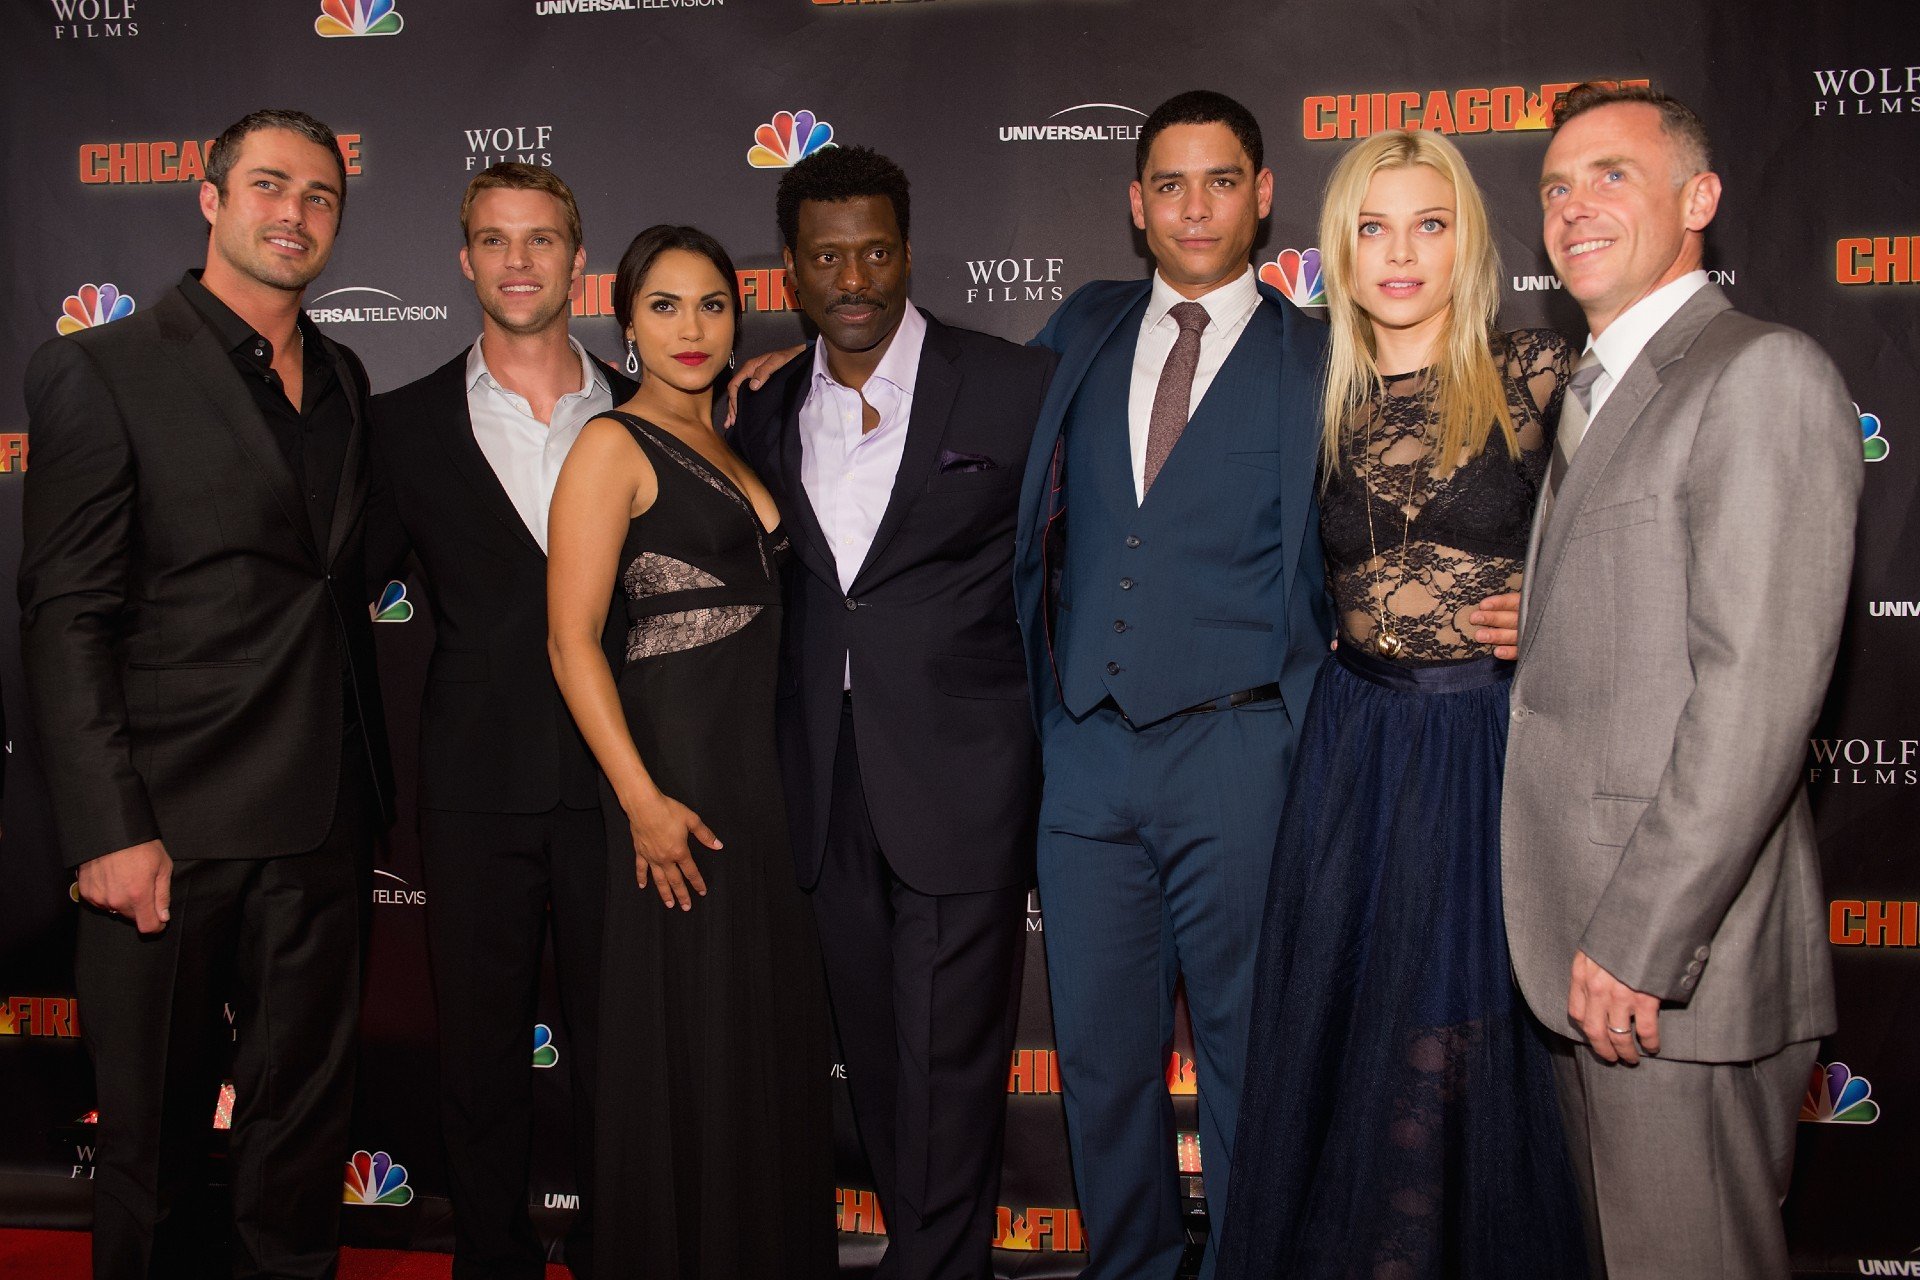 The Chicago Fire cast poses during an NBC event.